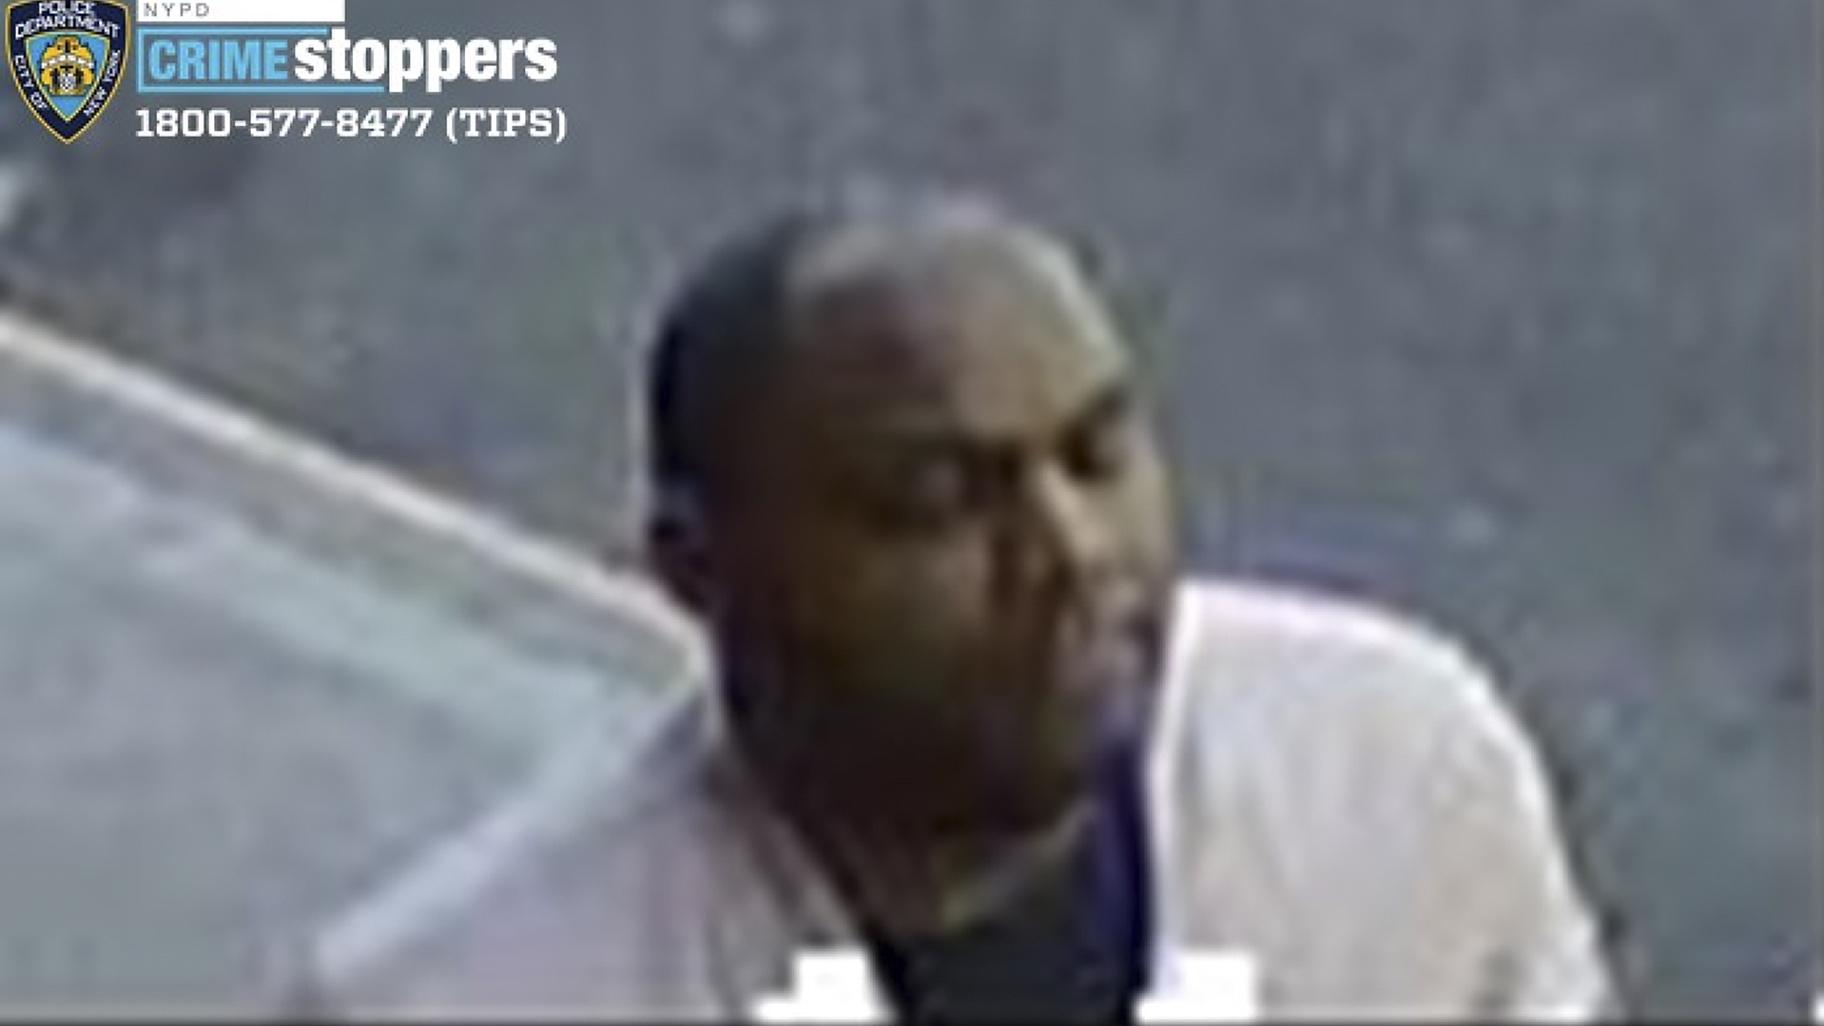 This image taken from surveillance video provided by the New York City Police Department shows a person of interest in connection with an assault of an Asian American woman, Monday, March 29, 2021, in New York. The NYPD is asking for the public’s assistance in identifying the man. (Courtesy of New York Police Department via AP)